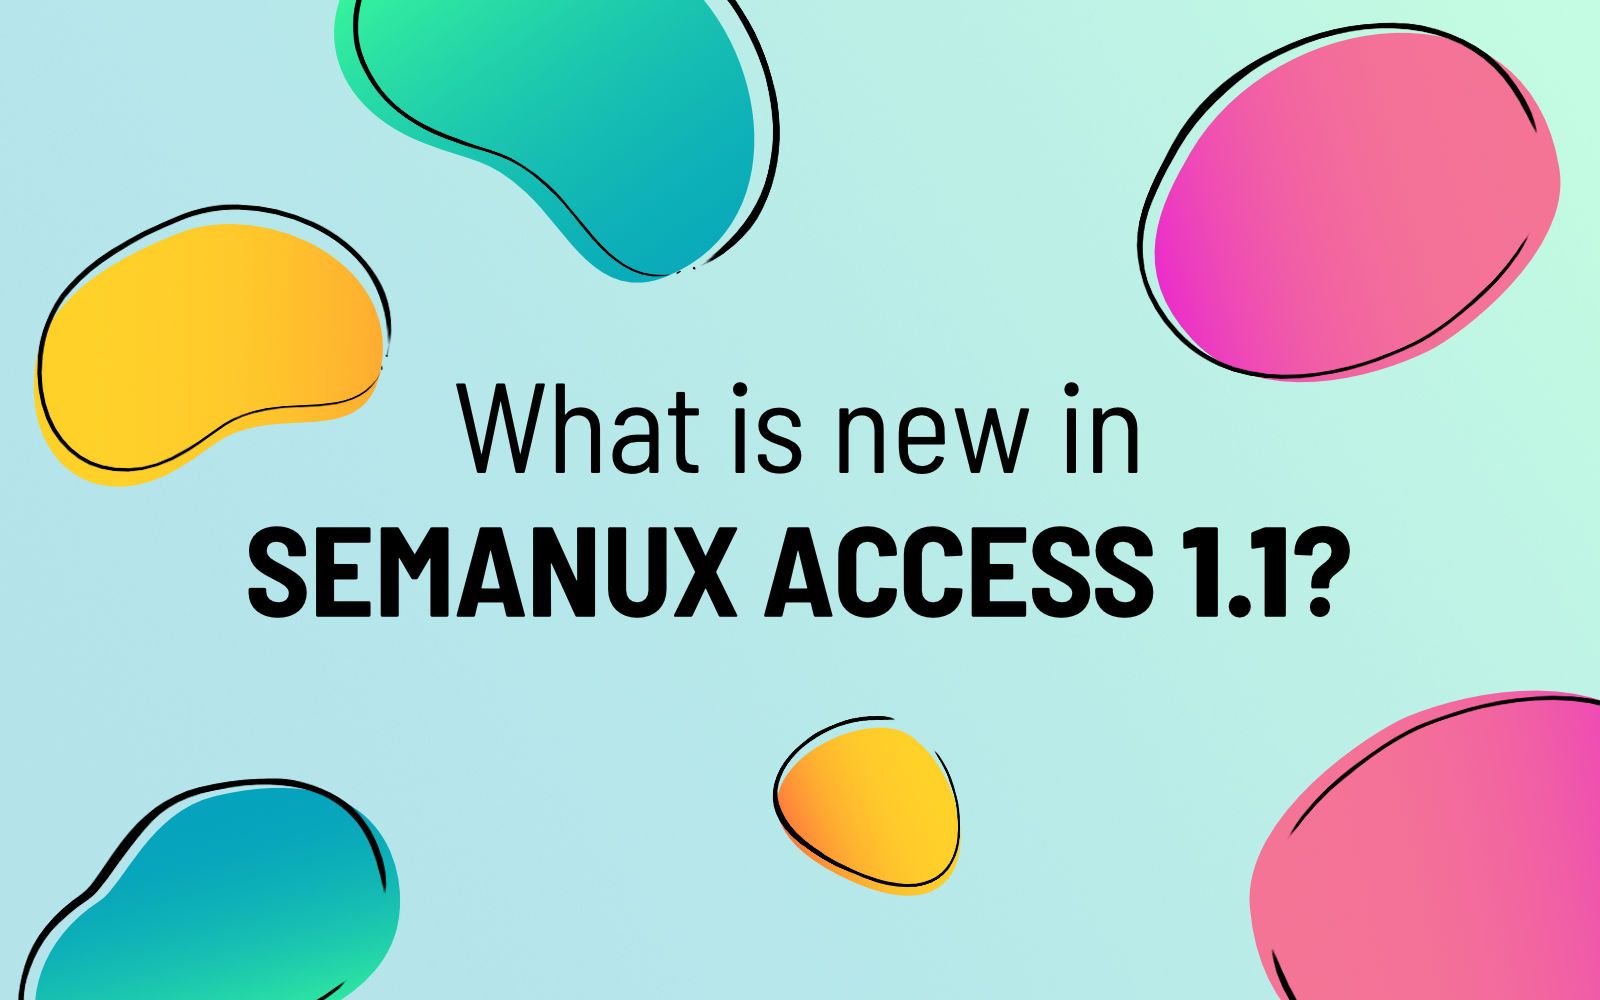 What is new in Semanux Access 1.1?